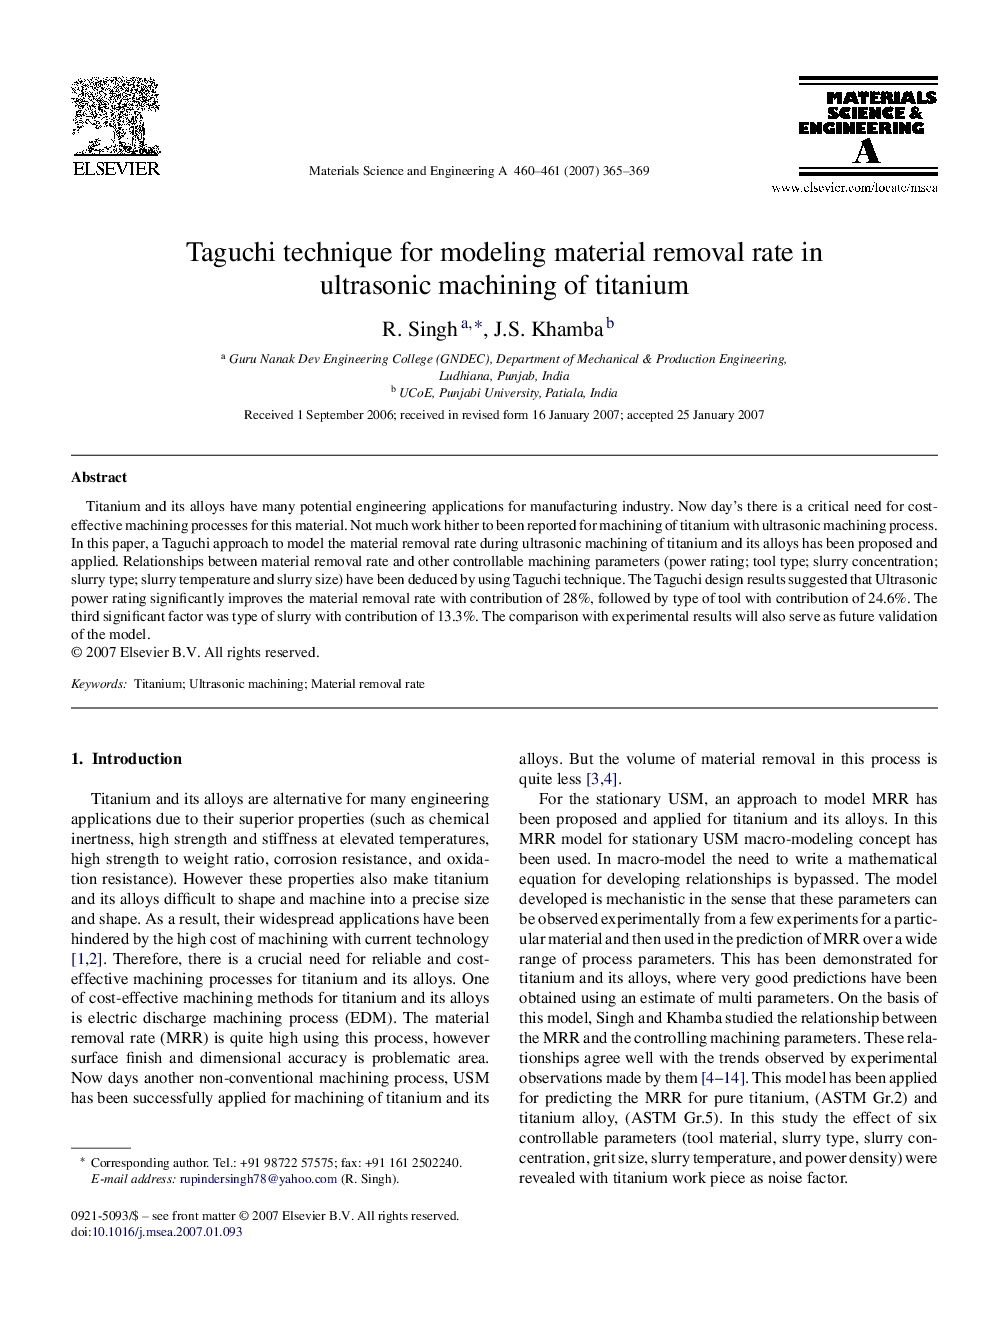 Taguchi technique for modeling material removal rate in ultrasonic machining of titanium